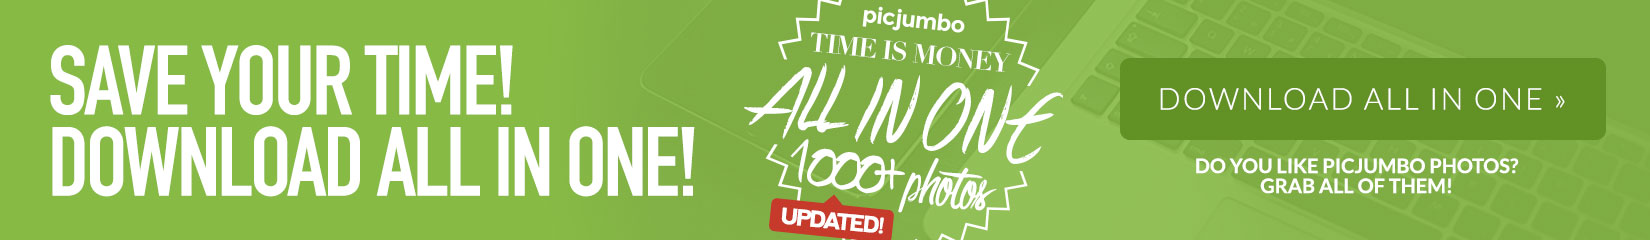 picjumbo-download-all-in-one